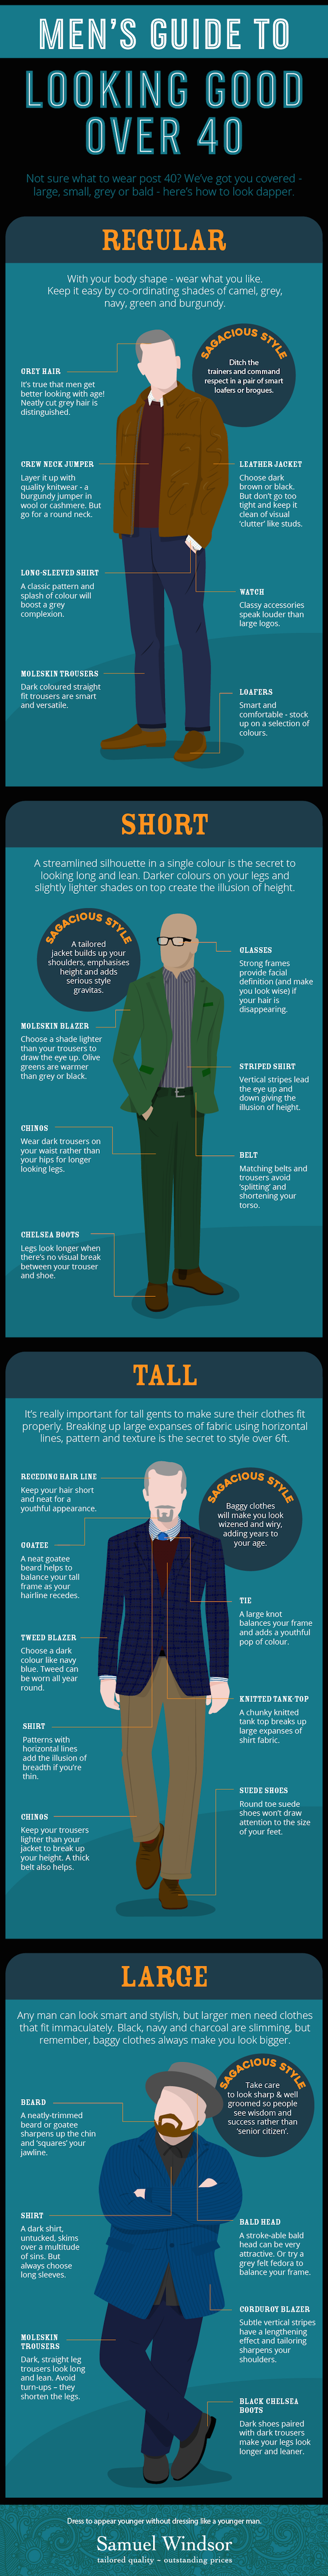 Men’s guide to looking good over 40 #infographic